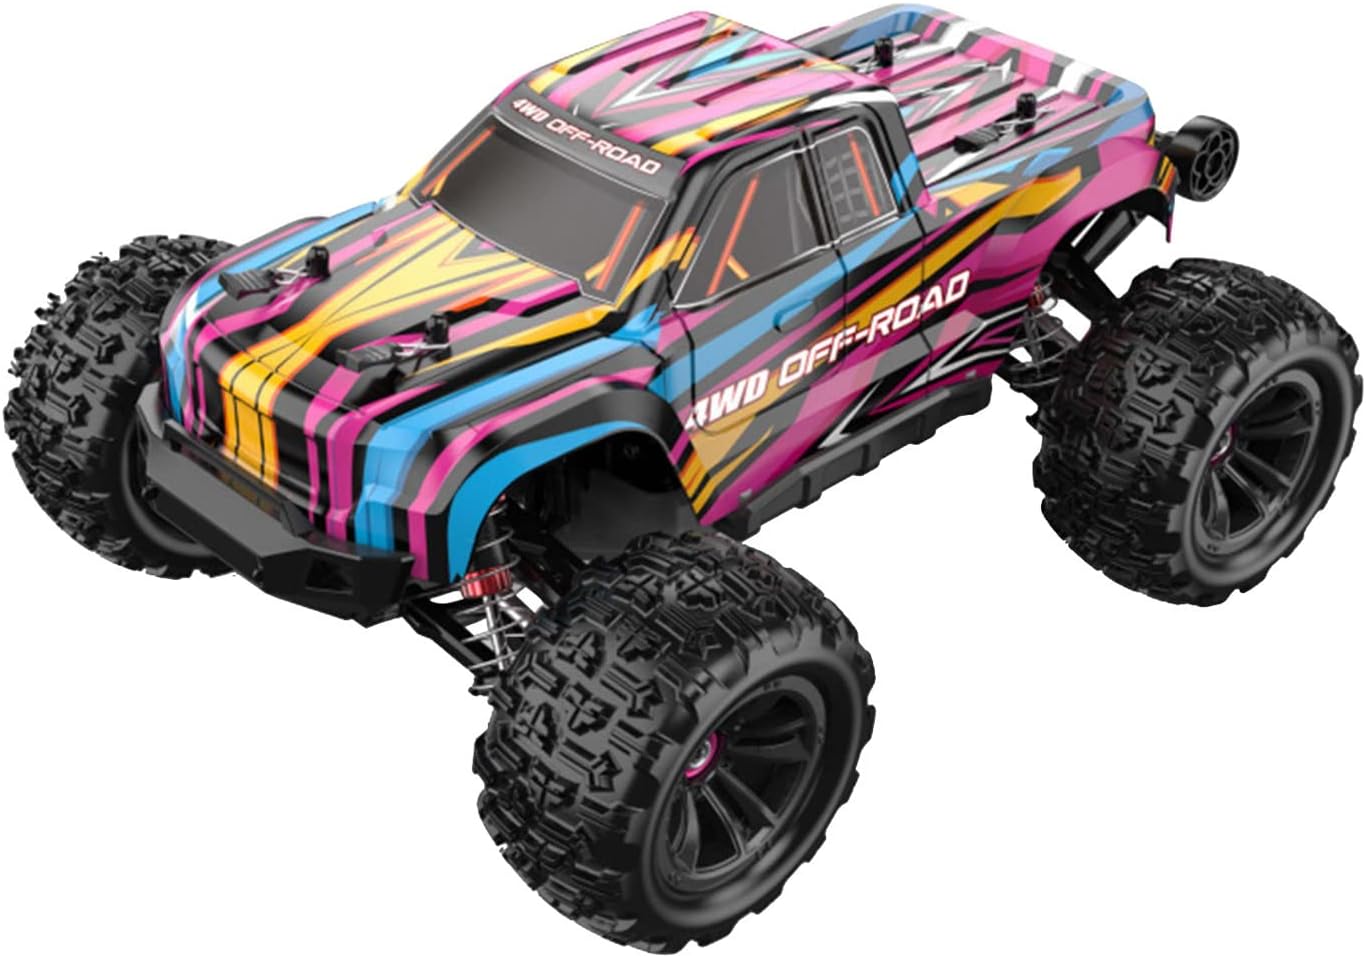 Hyper Go MJX 16209 1/16 Brushless RC 4WD High Speed Off-Road Buggy Truck